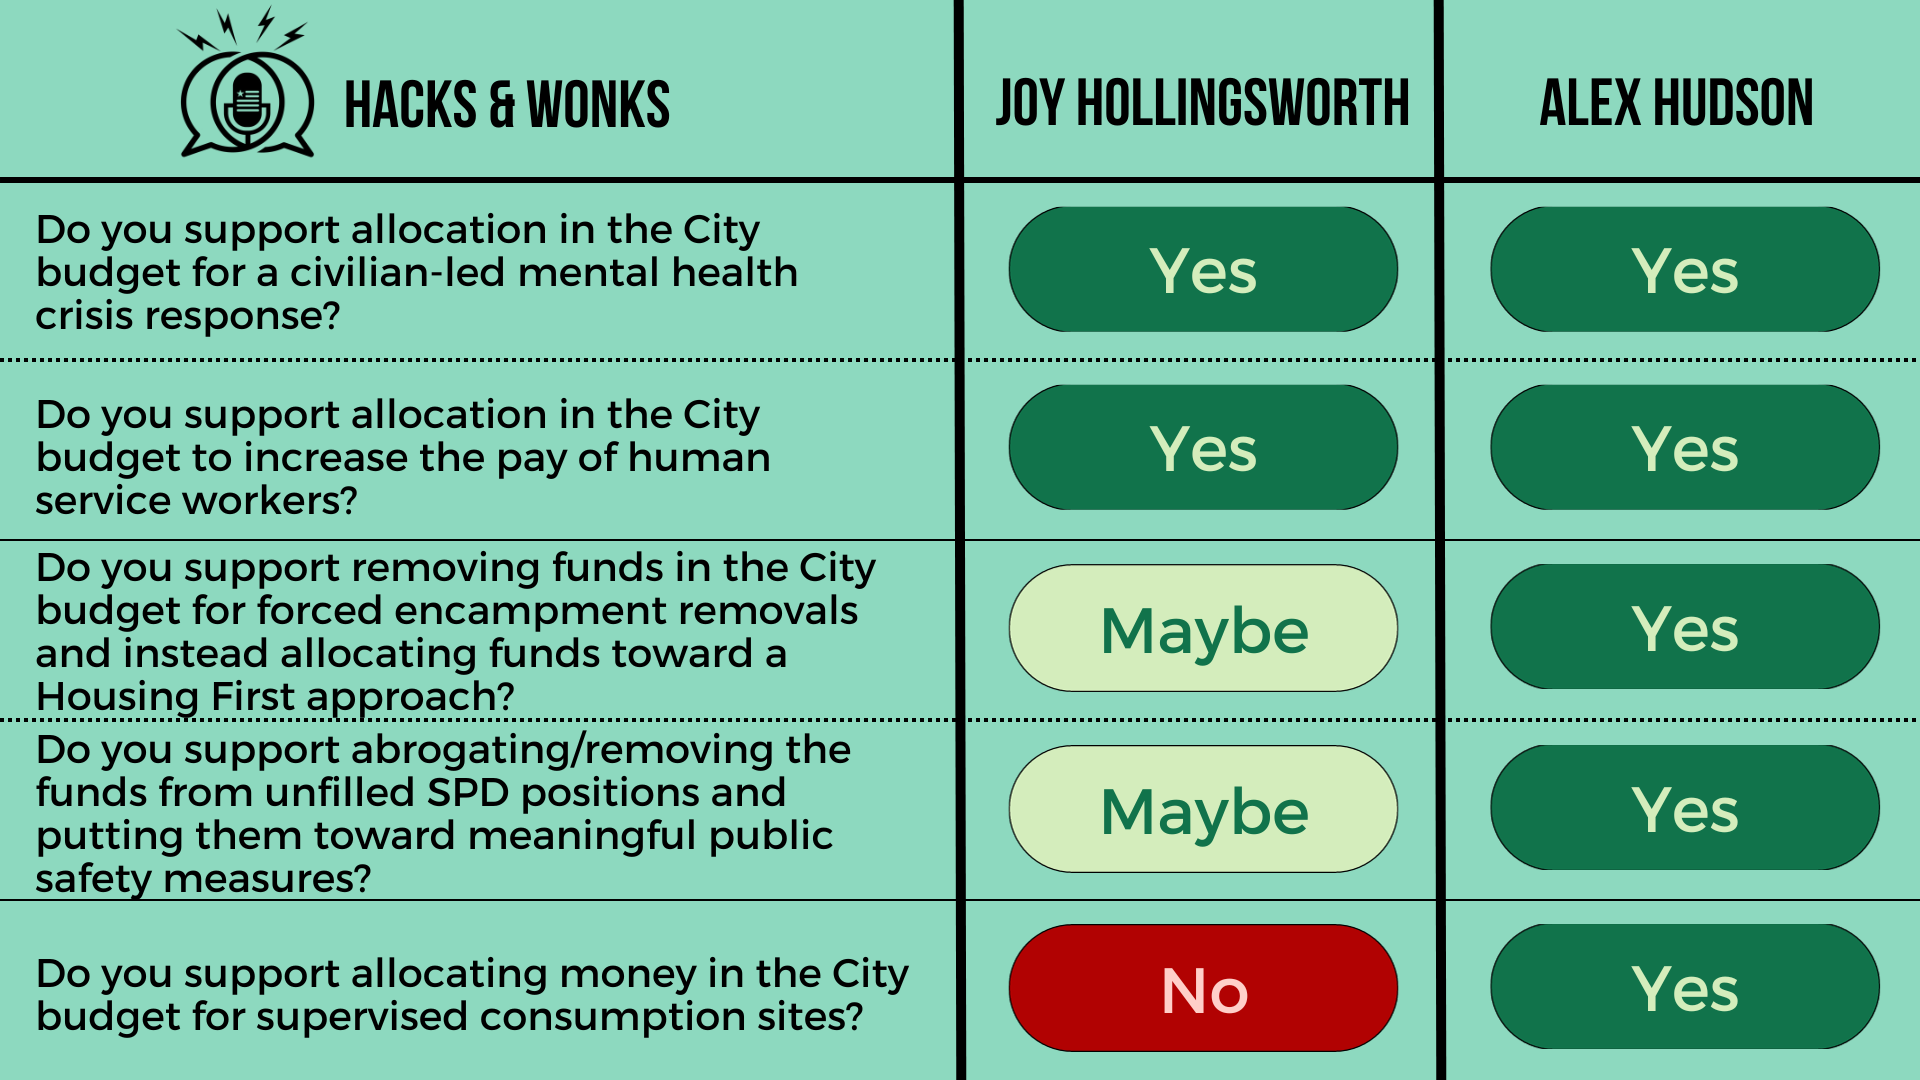 Q: Do you support allocation in the City budget for a civilian-led mental health crisis response? Joy Hollingsworth: Yes, Alex Hudson: Yes  Q: Do you support allocation in the City budget to increase the pay of human service workers? Joy Hollingswort